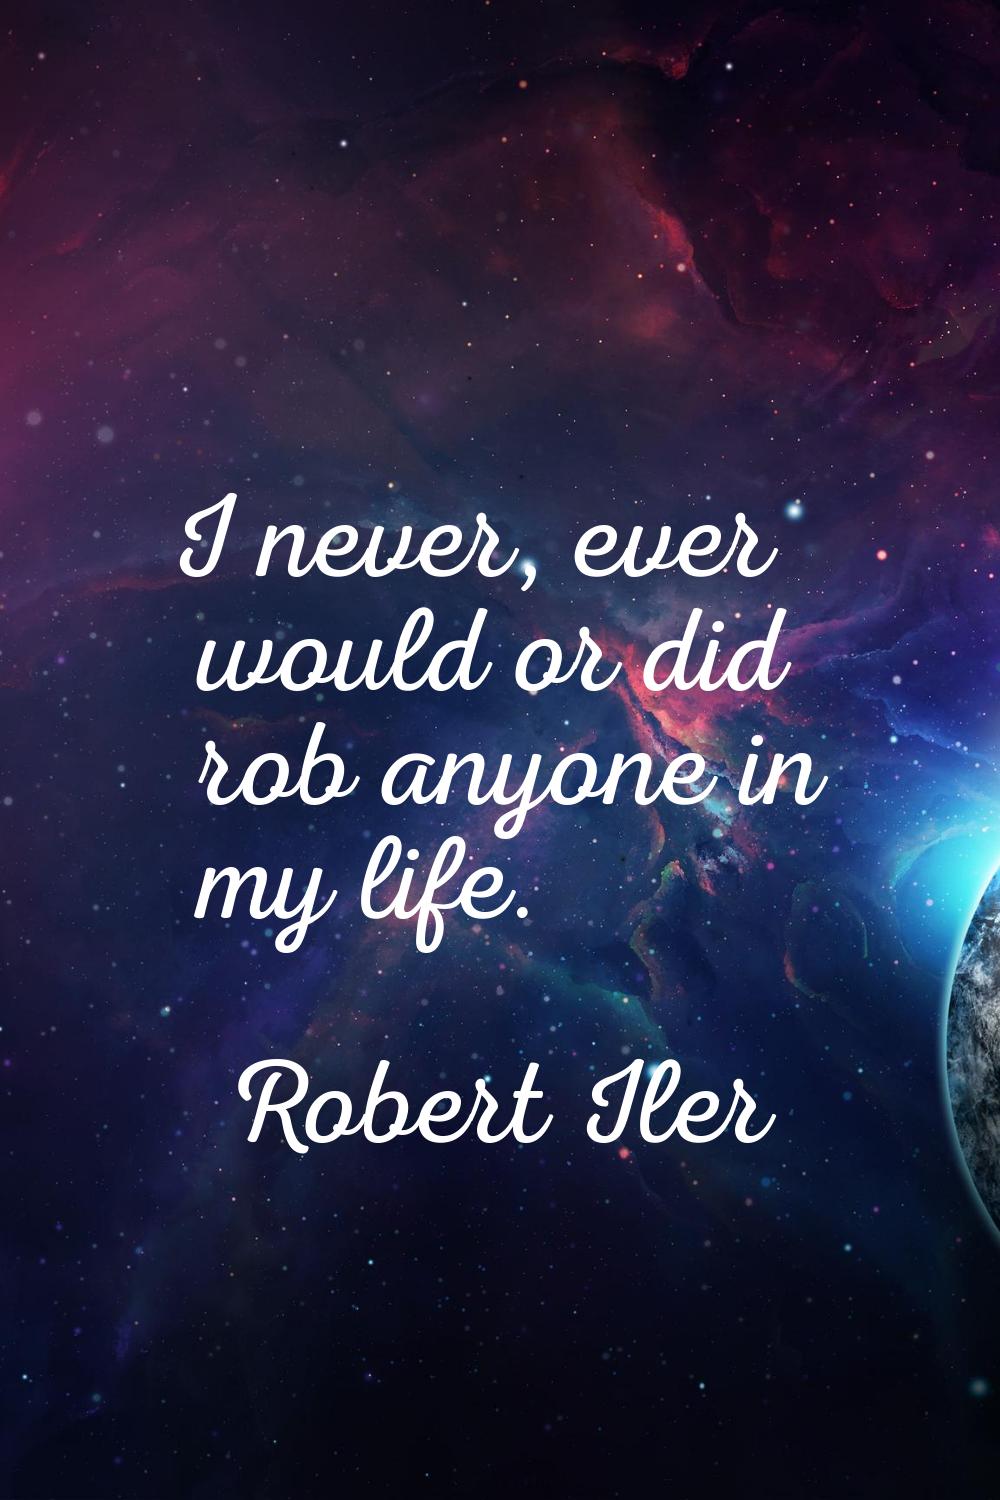 I never, ever would or did rob anyone in my life.